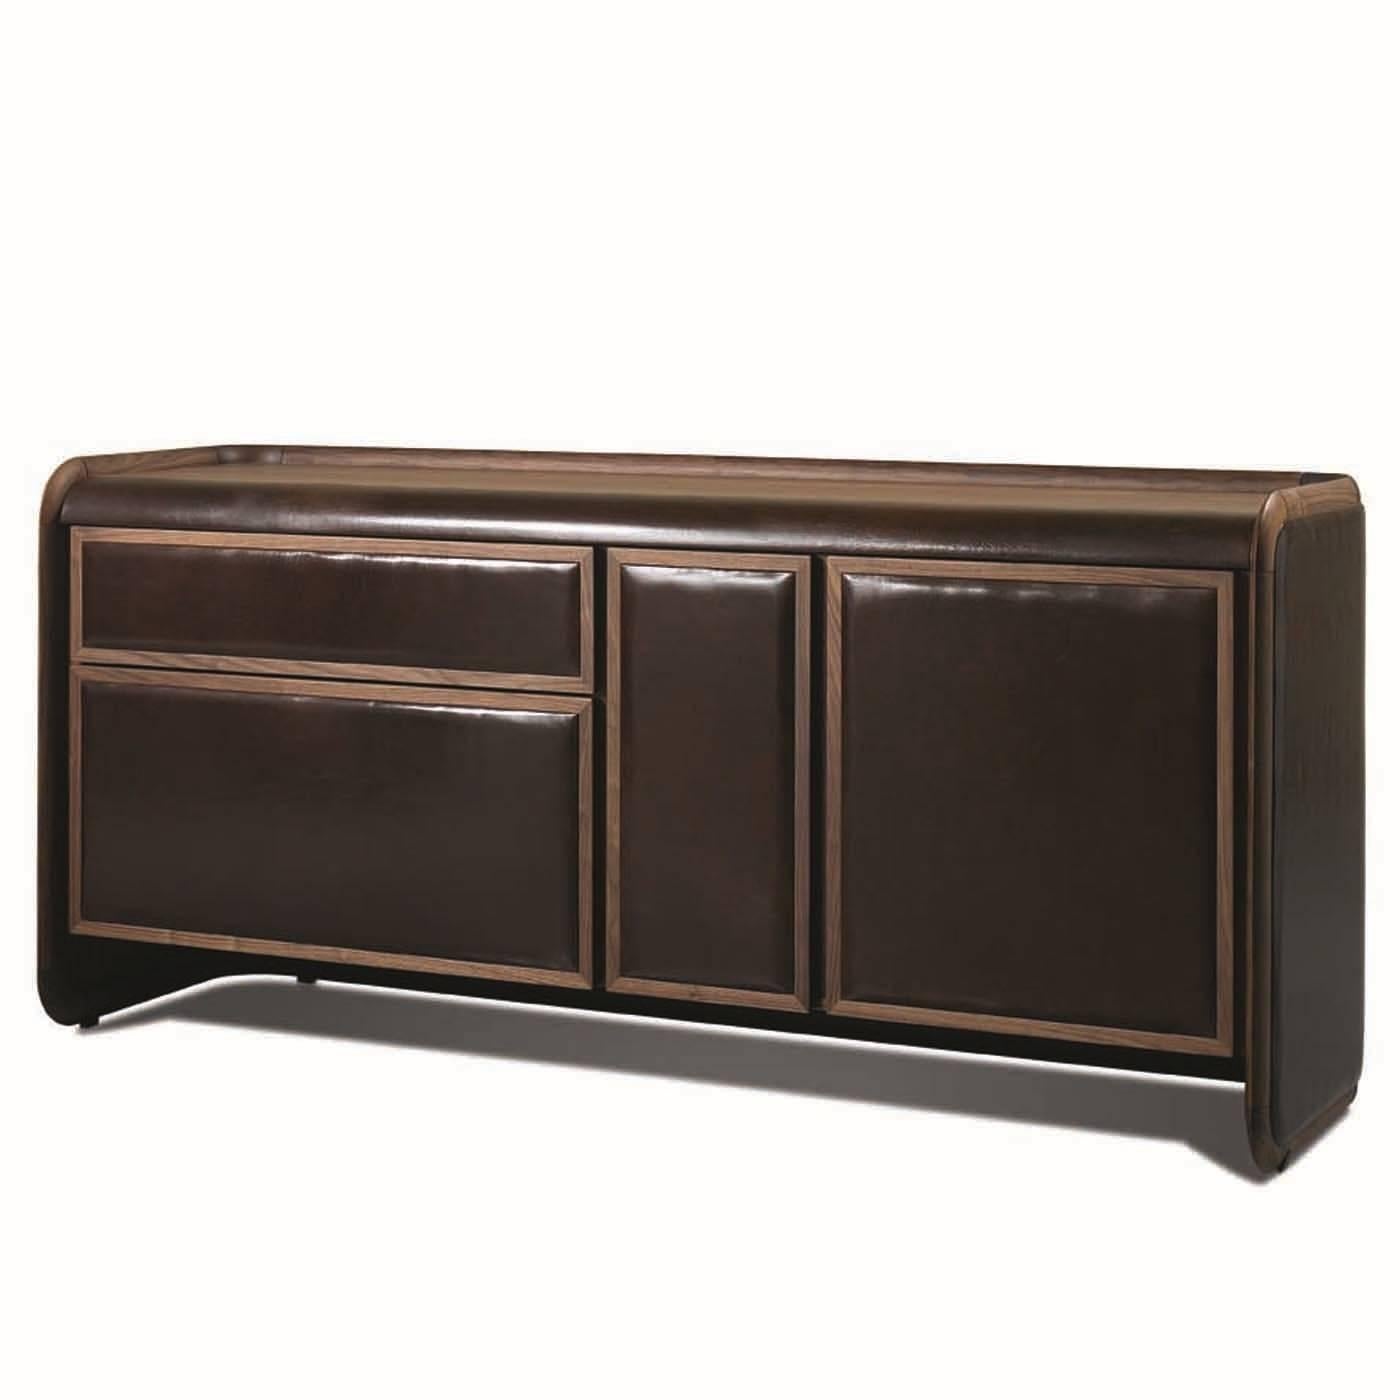 Midcentury charm and precious materials are the elements that make this elegant sideboard a perfect addition to any vintage or modern décor. The structure is in walnut wood and features a rectangular shape with soft, round corners. The front